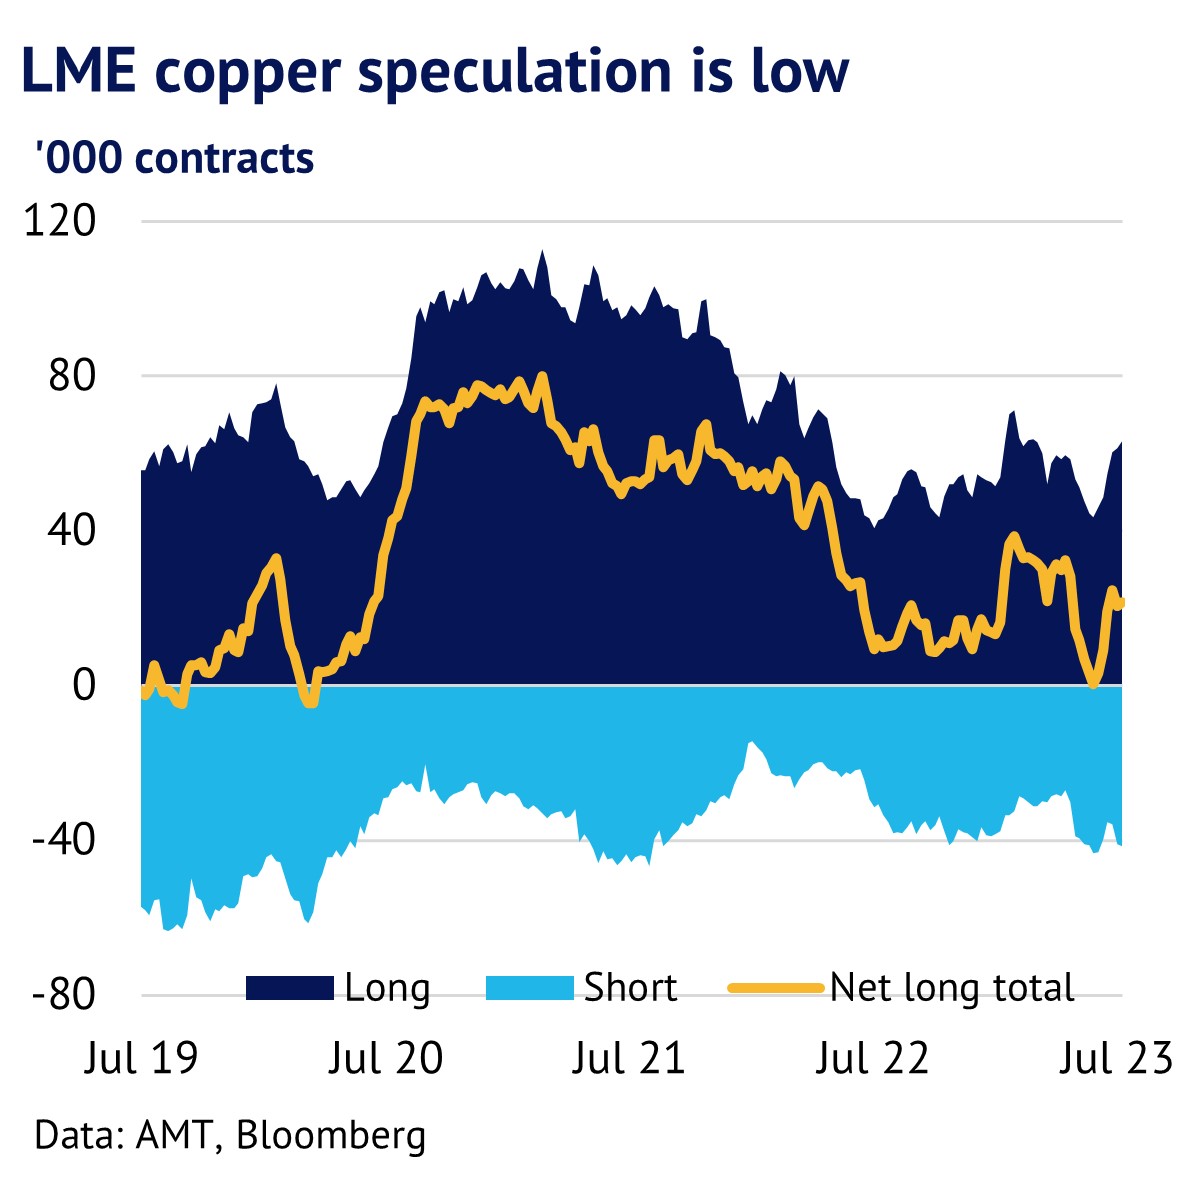 LME Copper Speculation Grows